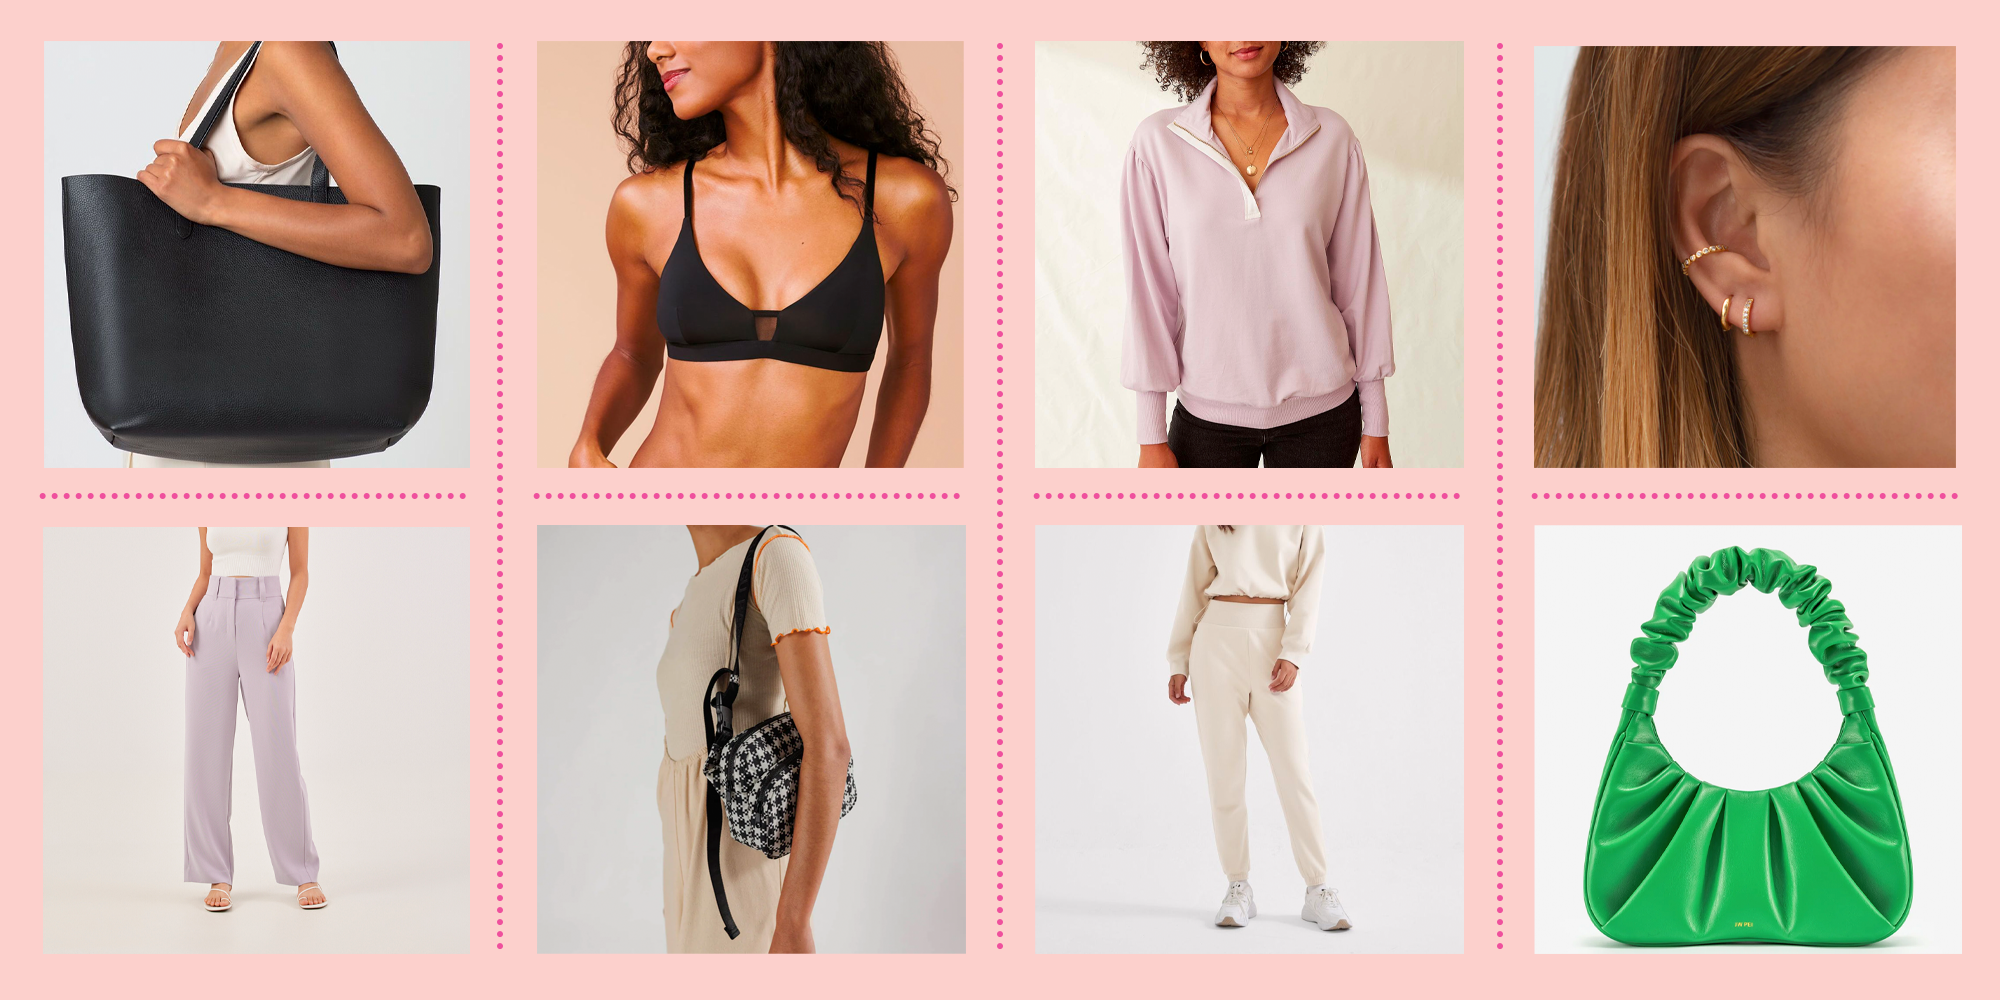 Love, Bonito Just Launched Lingerie & These Are The Pieces We Love - TODAY